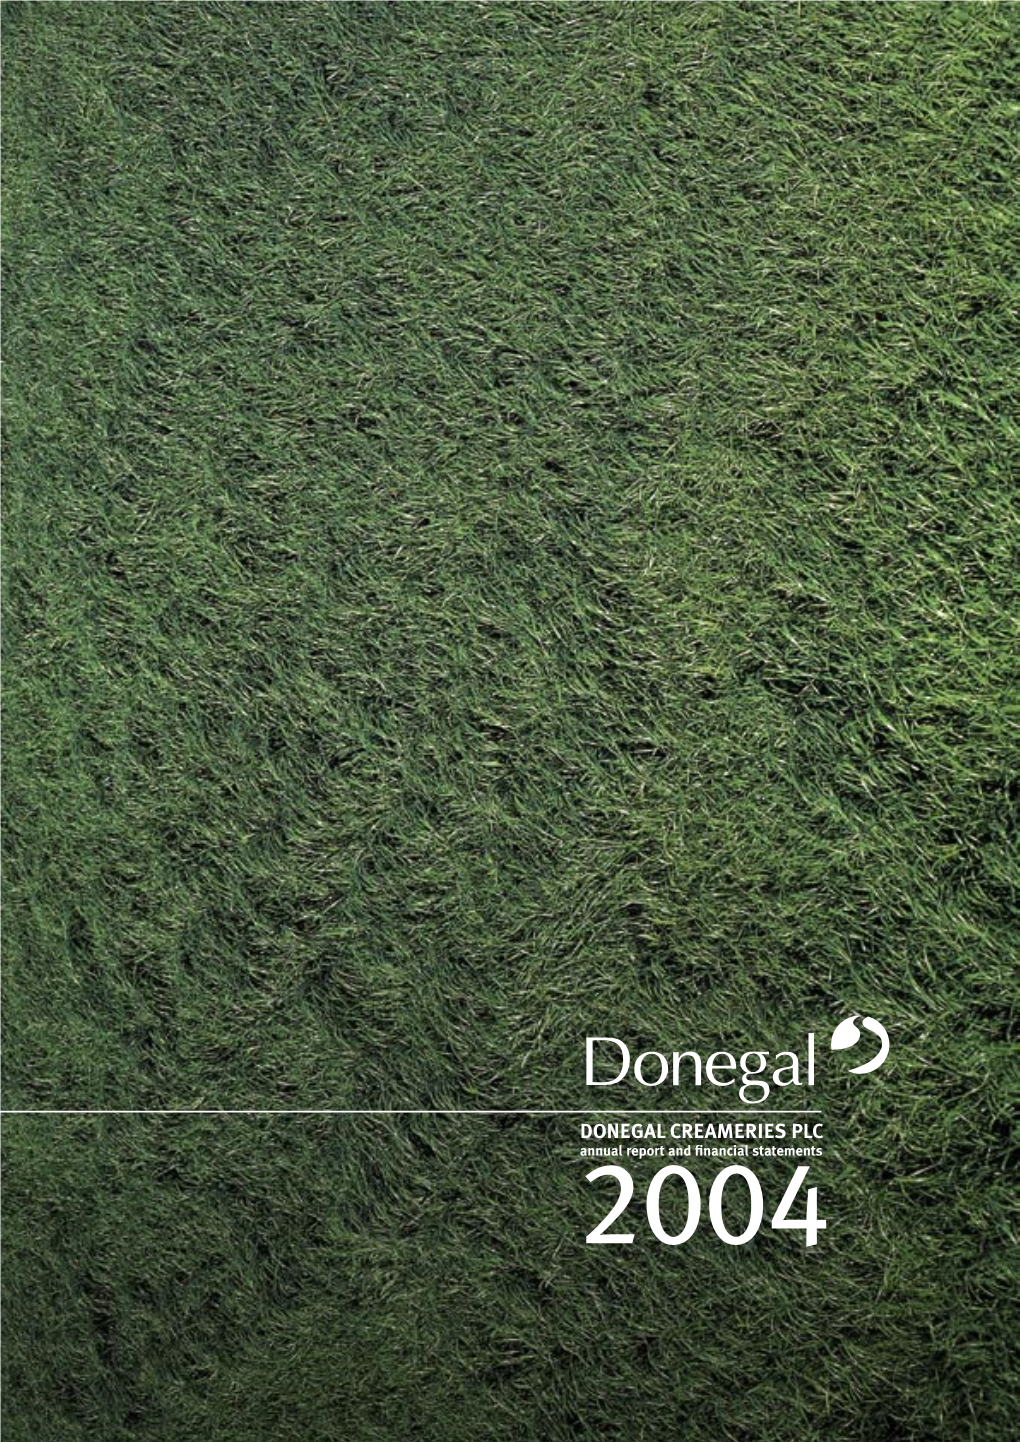 DONEGAL CREAMERIES PLC 2004Annual Report and ﬁnancial Statements DONEGAL CREAMERIES PLC